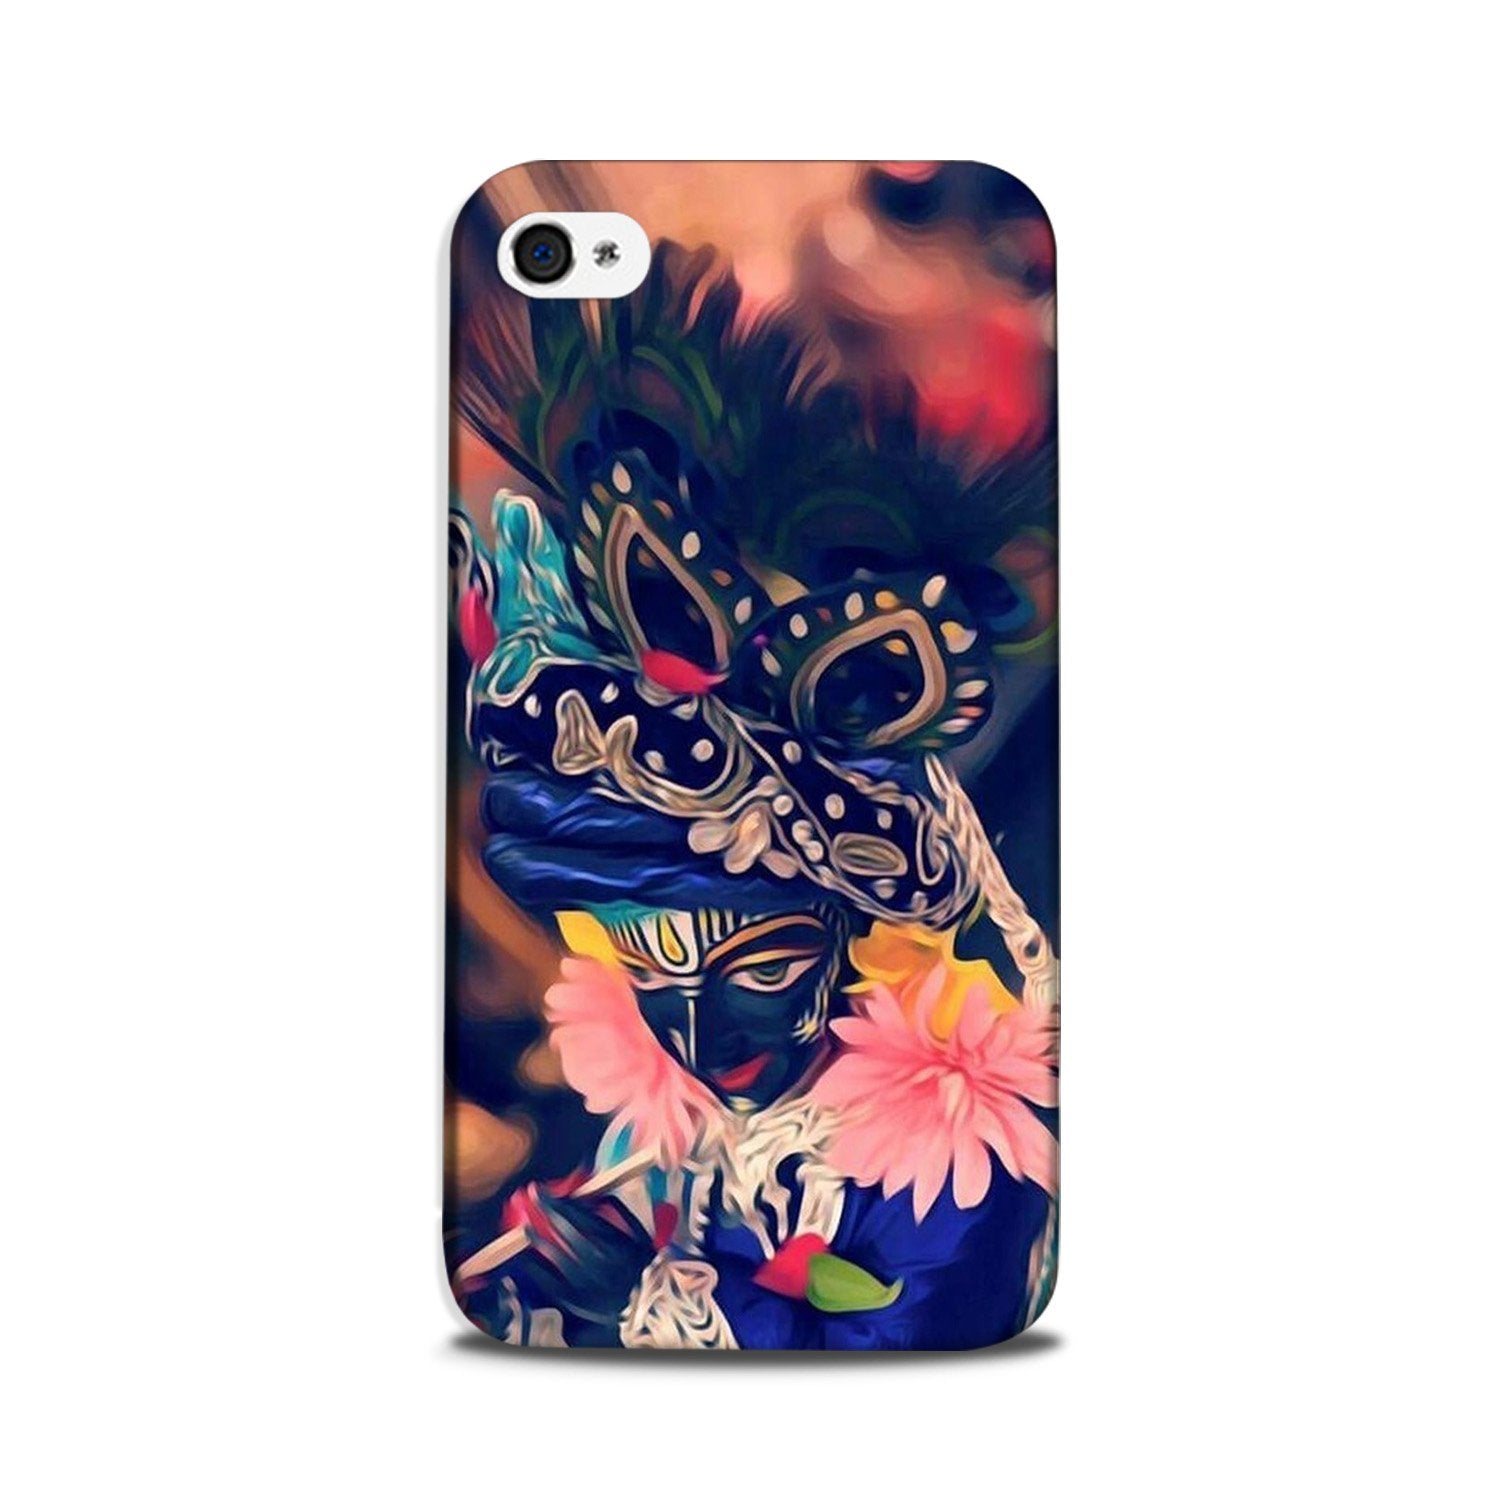 Lord Krishna Case for iPhone 5/ 5s